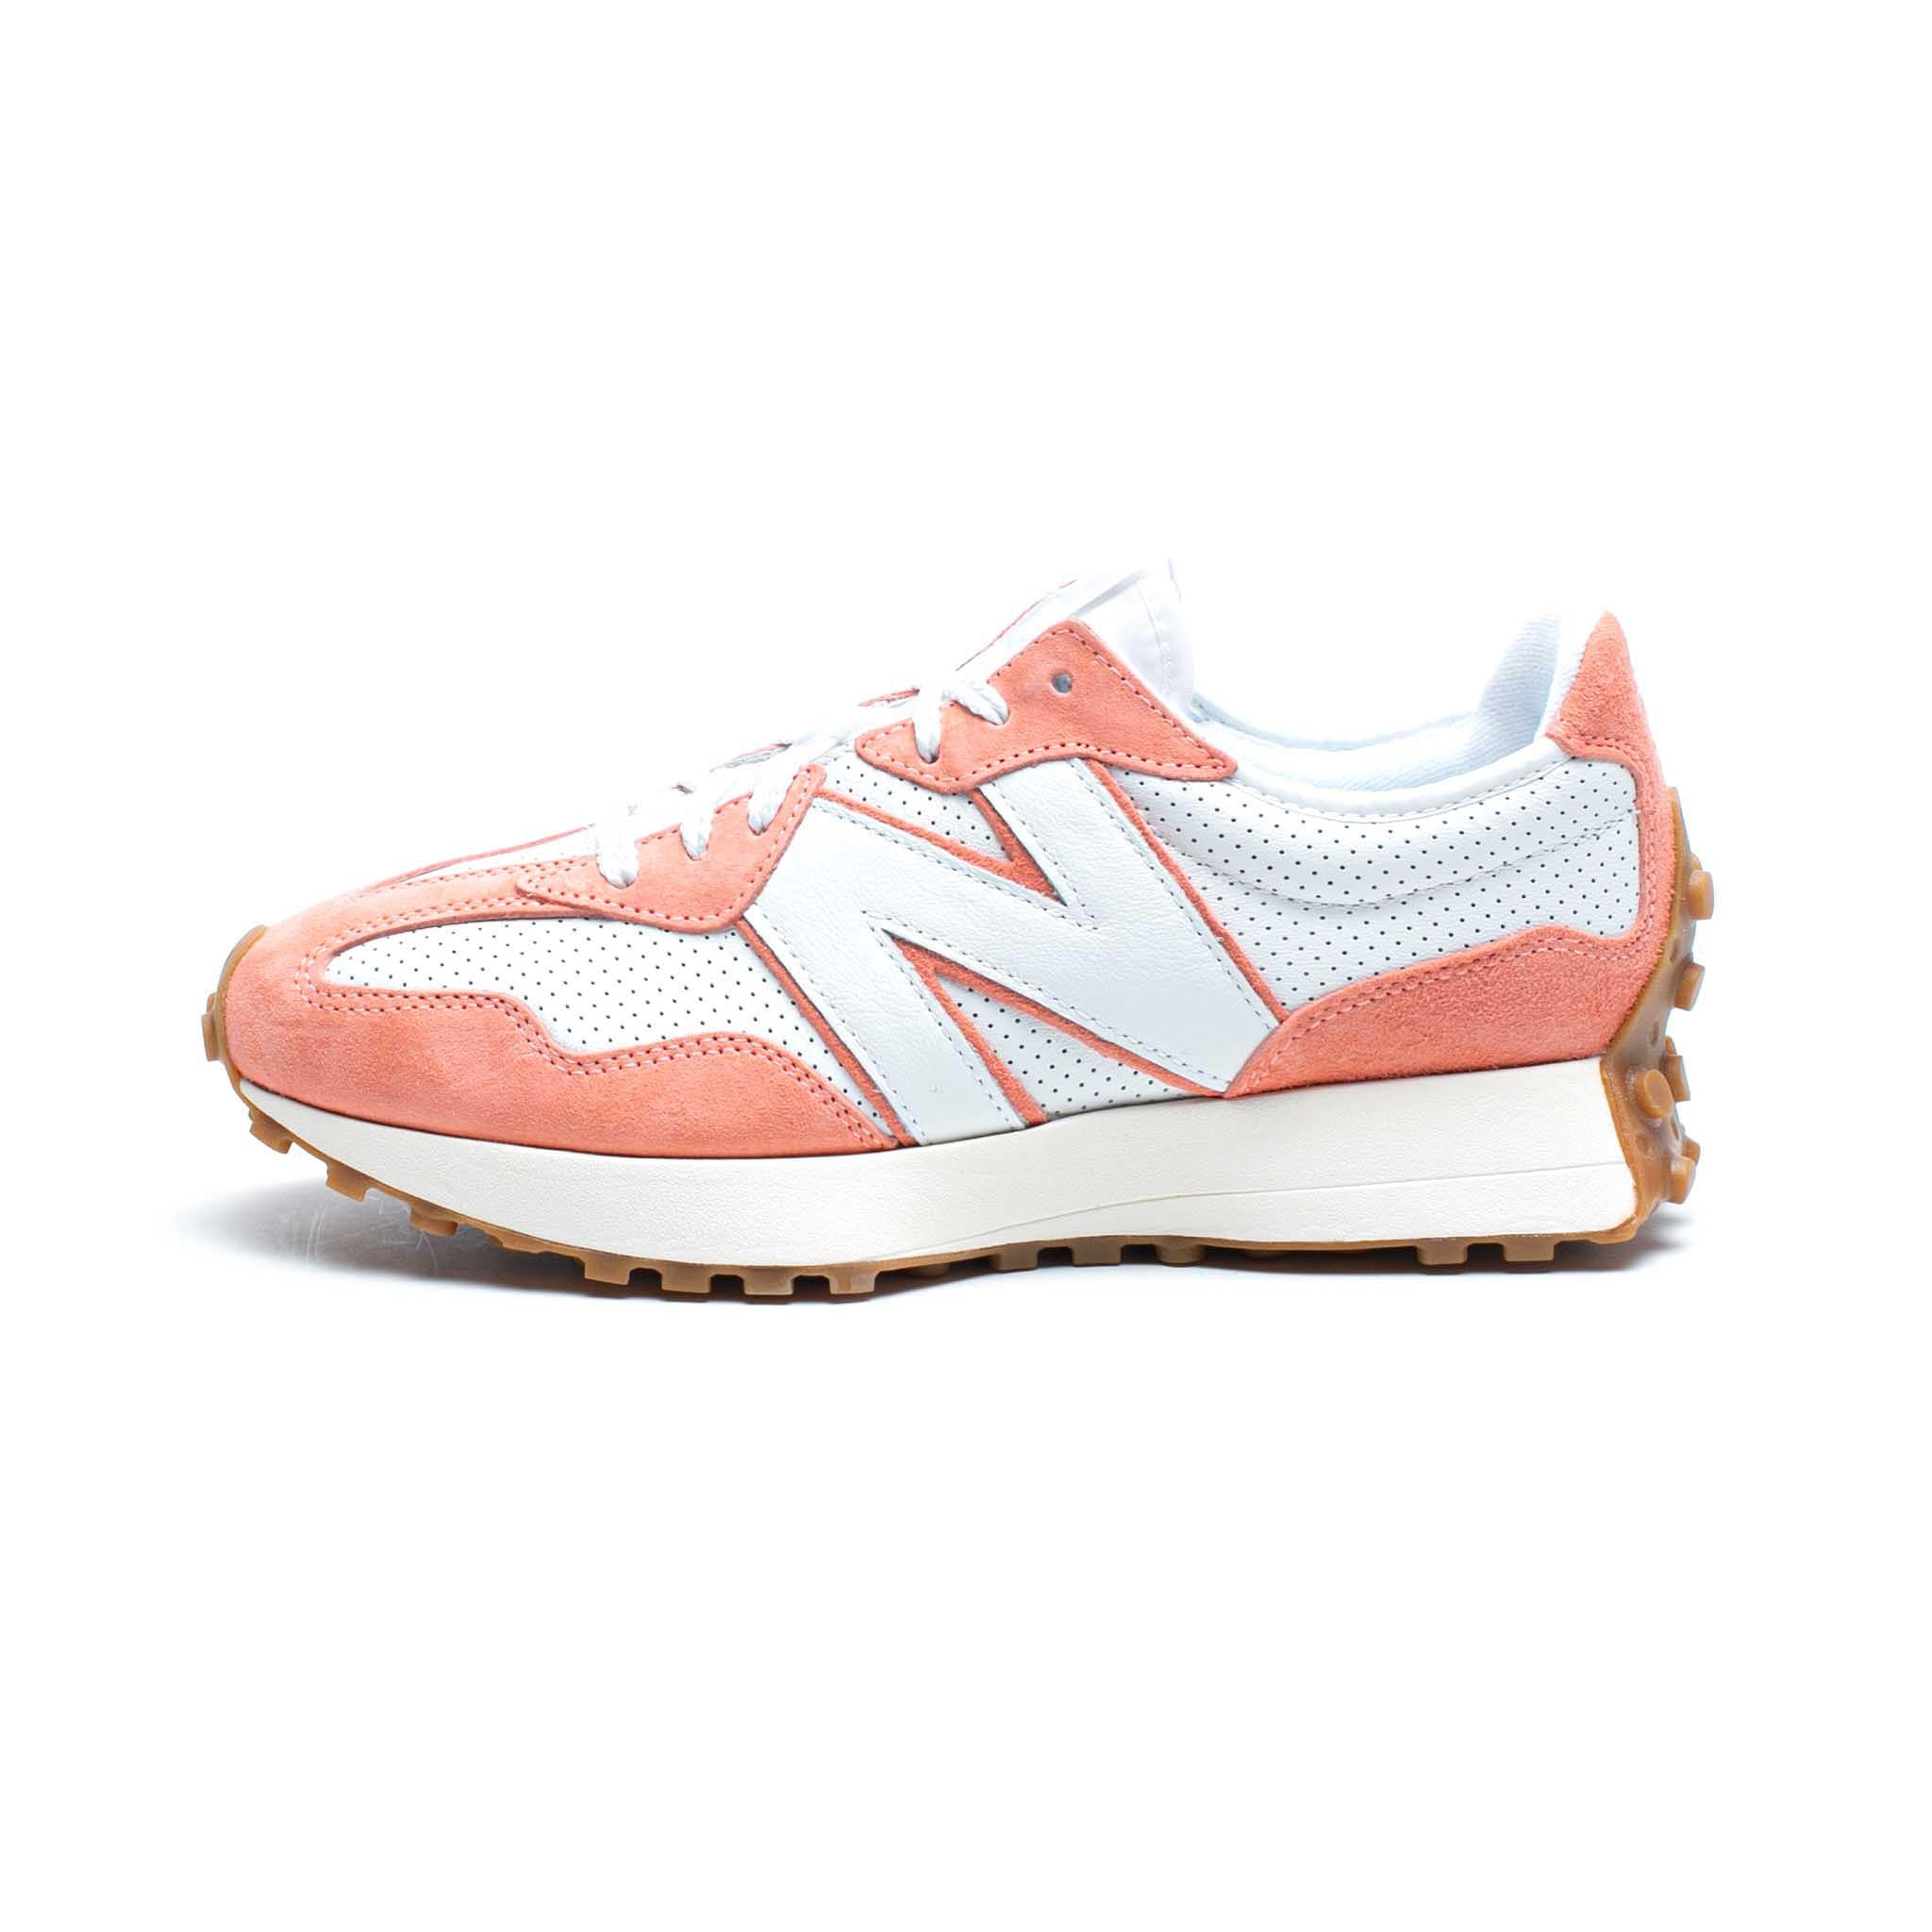 New Balance Men S Sneakerbox Page 2